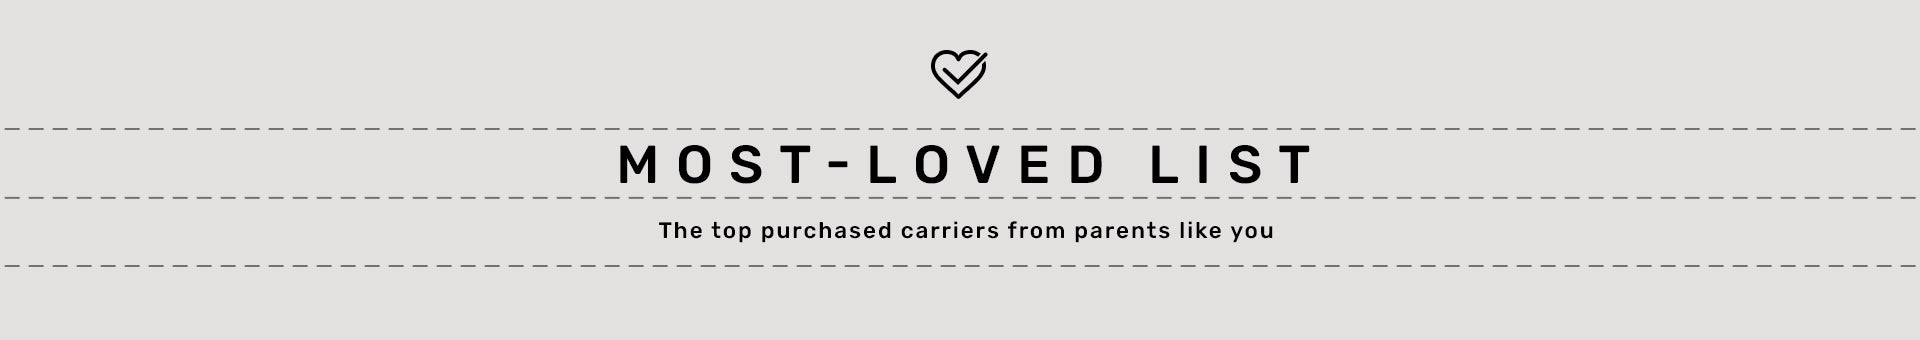 Most loved list of carriers - top purchased from parents like you